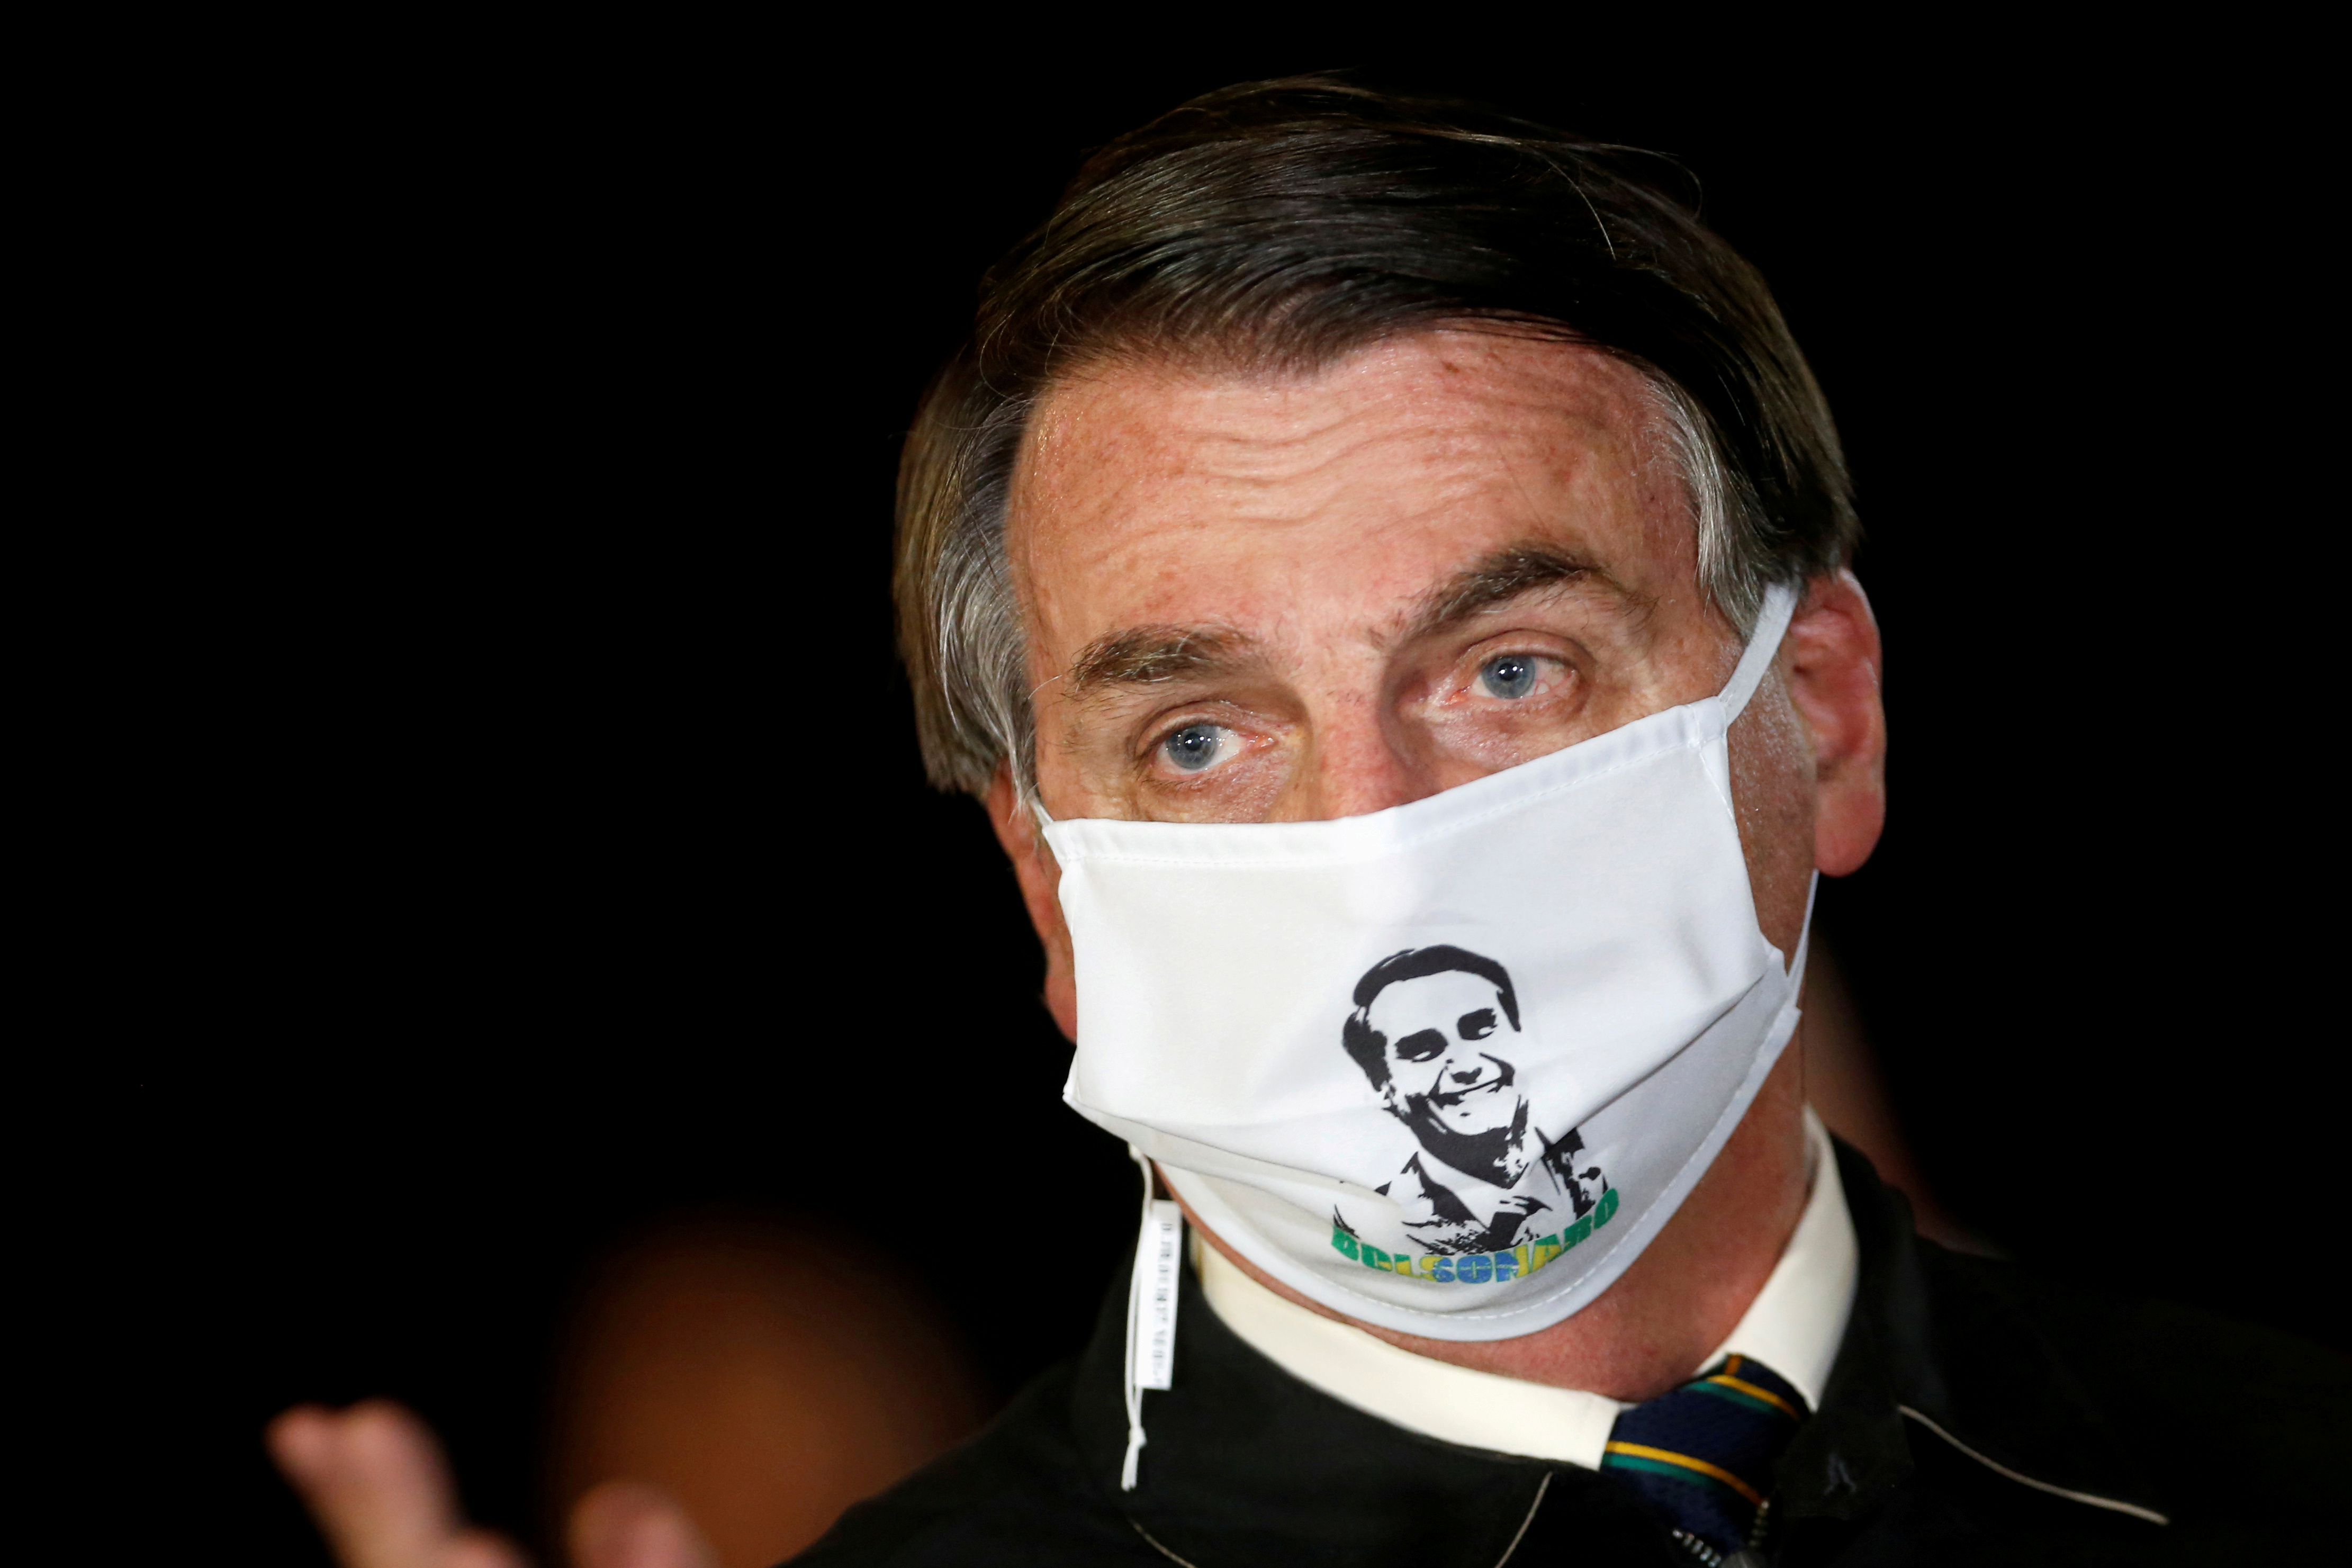 FILE PHOTO: Brazil's President Jair Bolsonaro speaks with journalists while wearing a protective face mask as he arrives at Alvorada Palace, amid the coronavirus disease (COVID-19) outbreak, in Brasilia, Brazil, May 22, 2020. Photo: Reuters